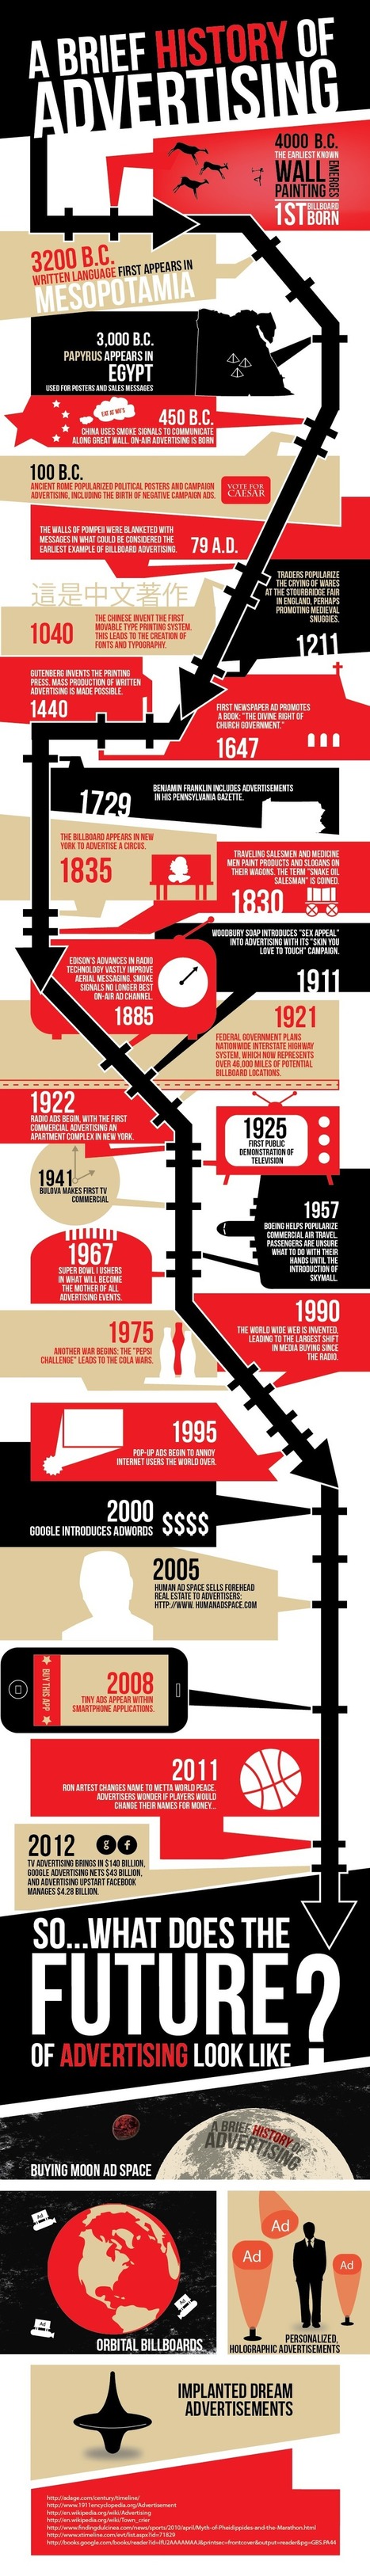 MadMen Is Back, Ocean Media Celebrates with History of Advertising Infographic | BI Revolution | Scoop.it